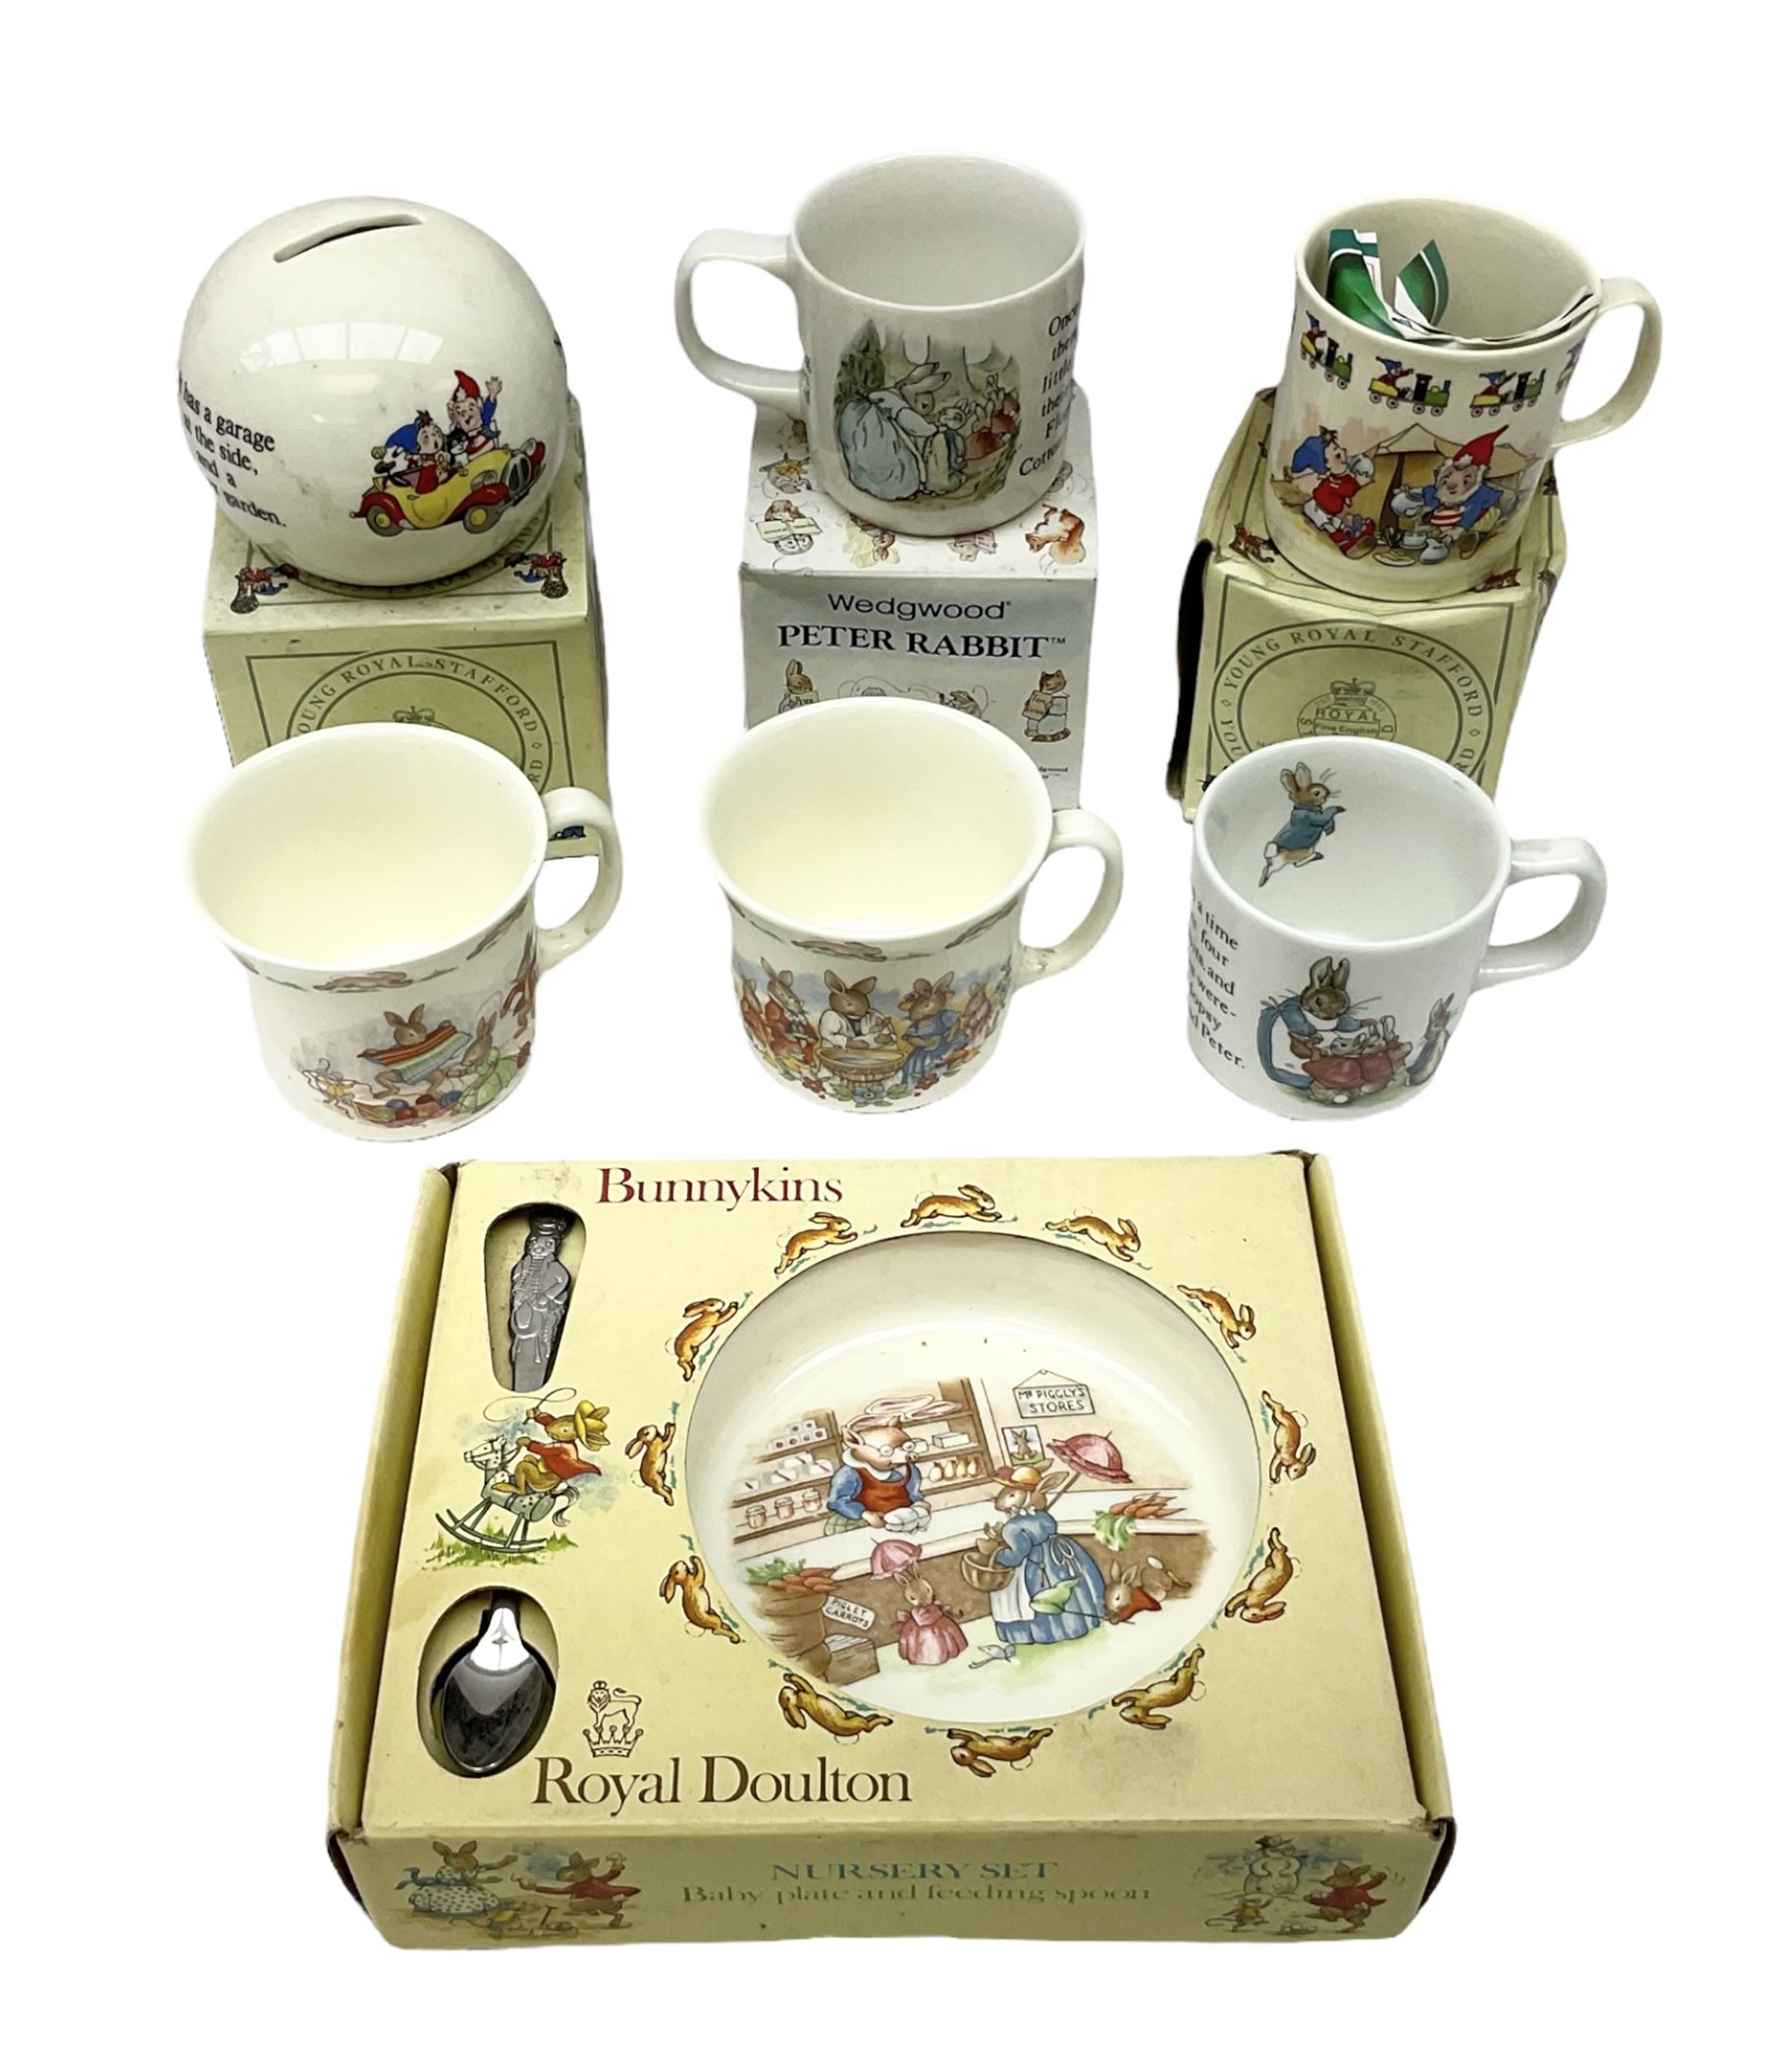 Royal Doulton Bunnykins nursery set in box and two cups